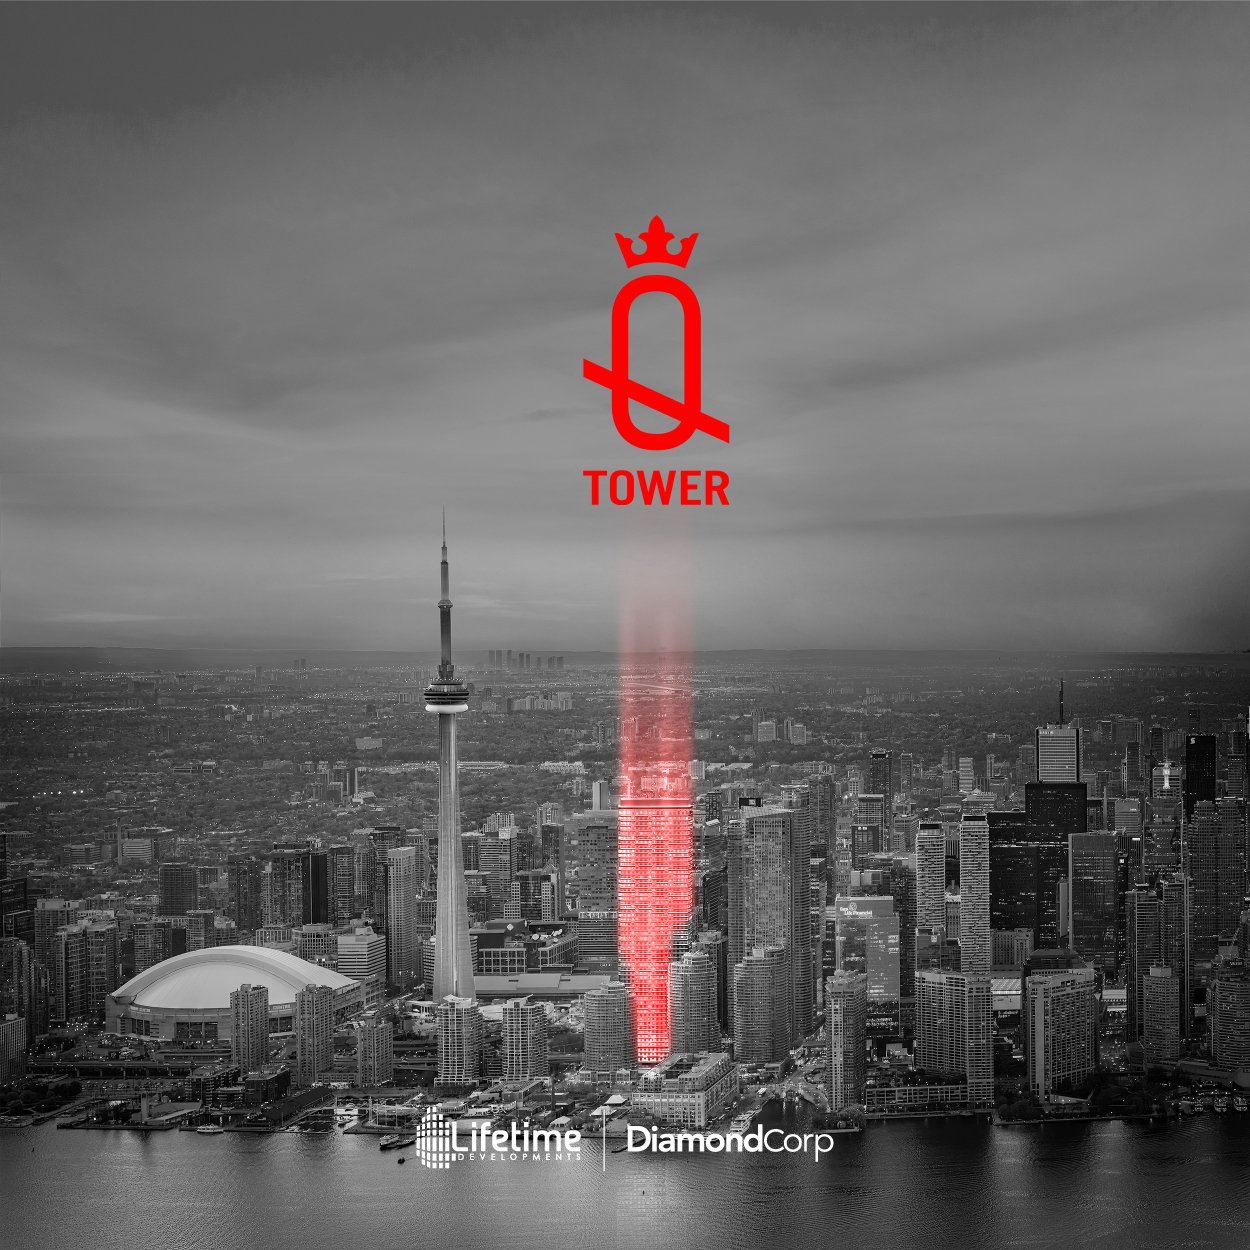 Q Tower Rendering with logo.jpg